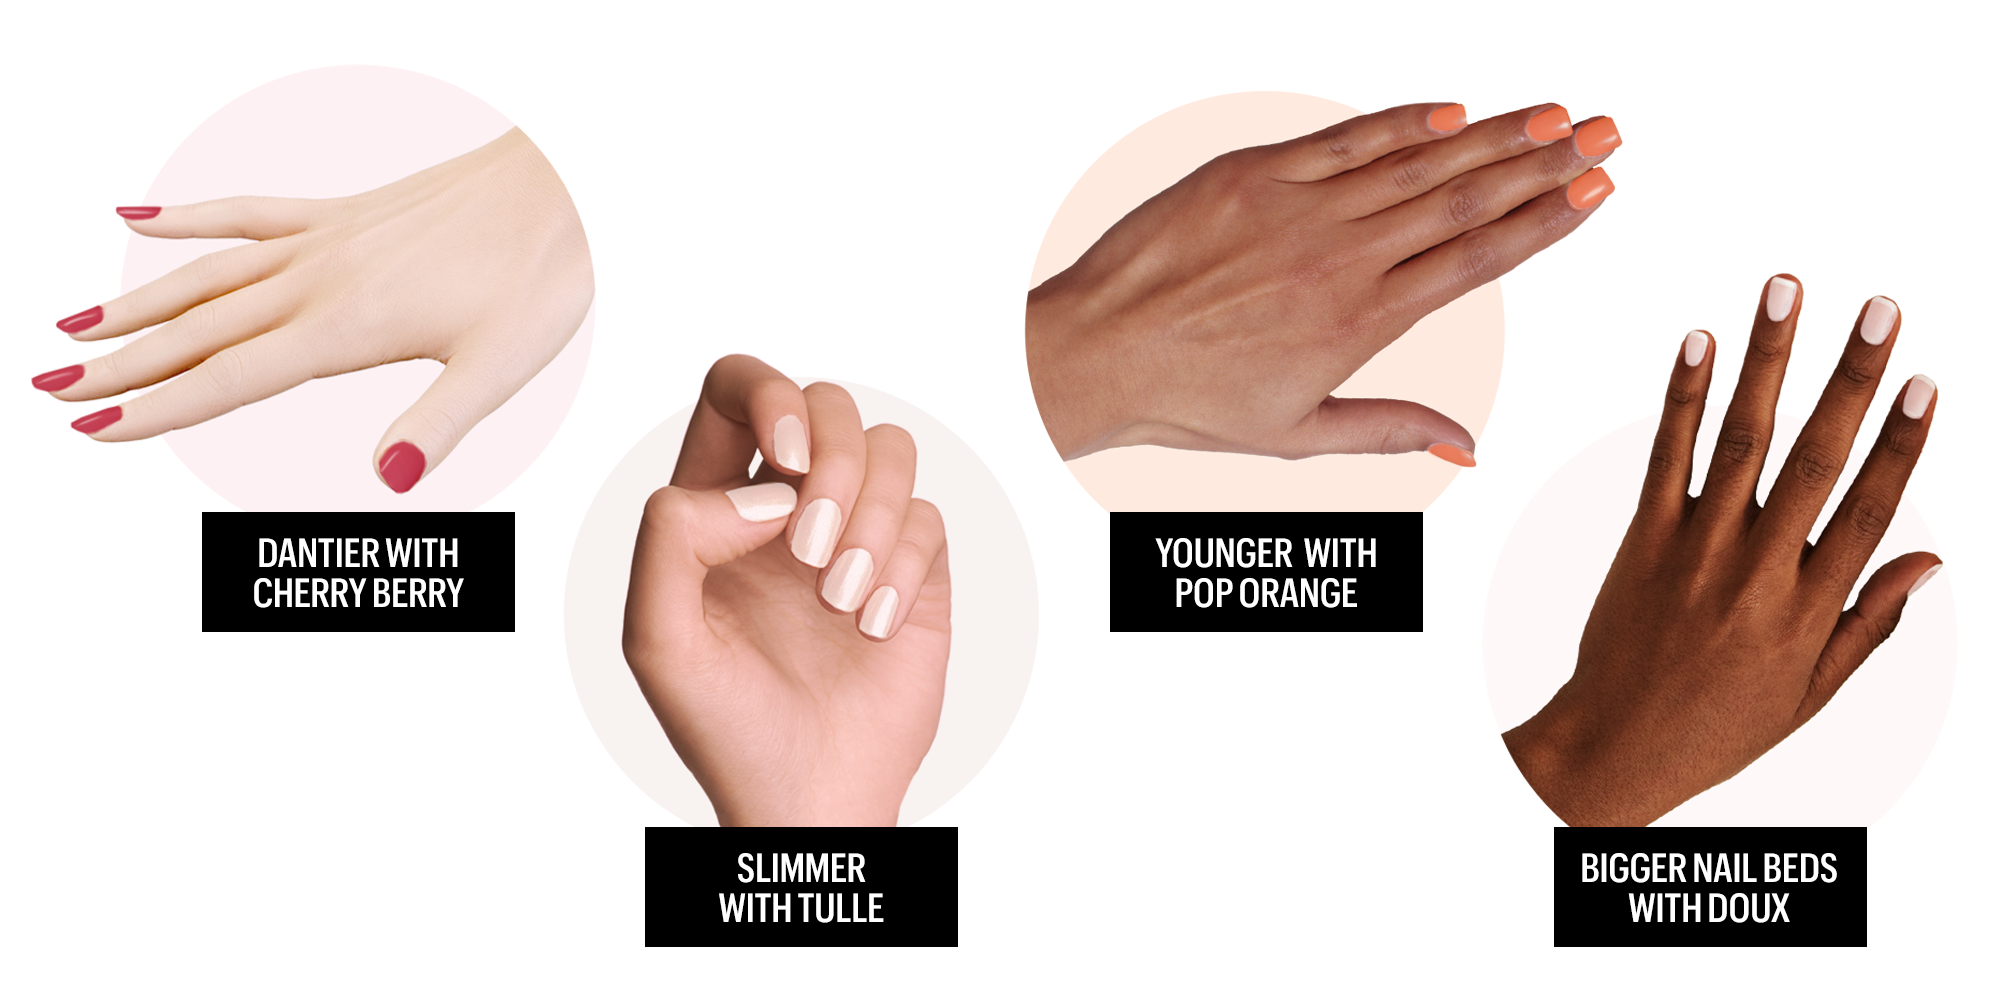 4. "The Most Flattering Nail Colors for Your Engagement Ring" - wide 7